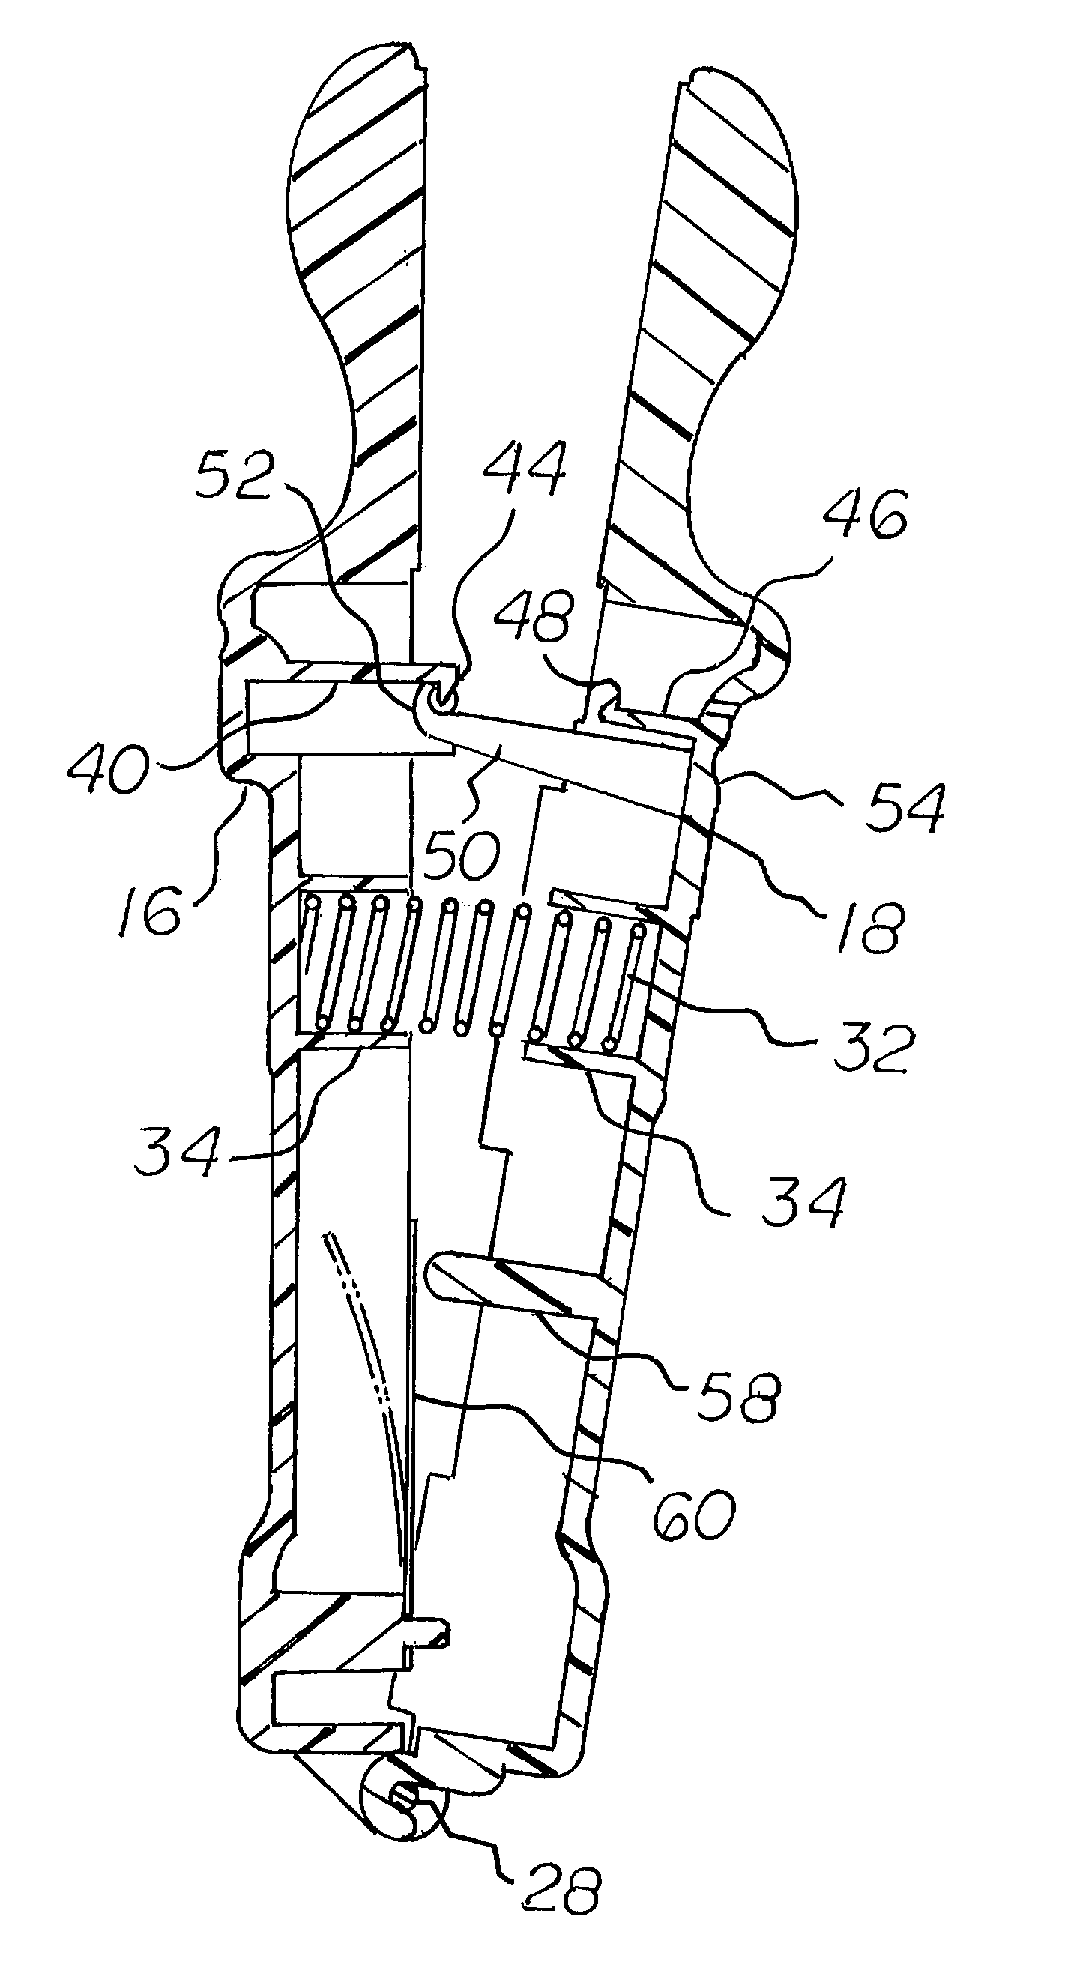 Incontinency abatement system